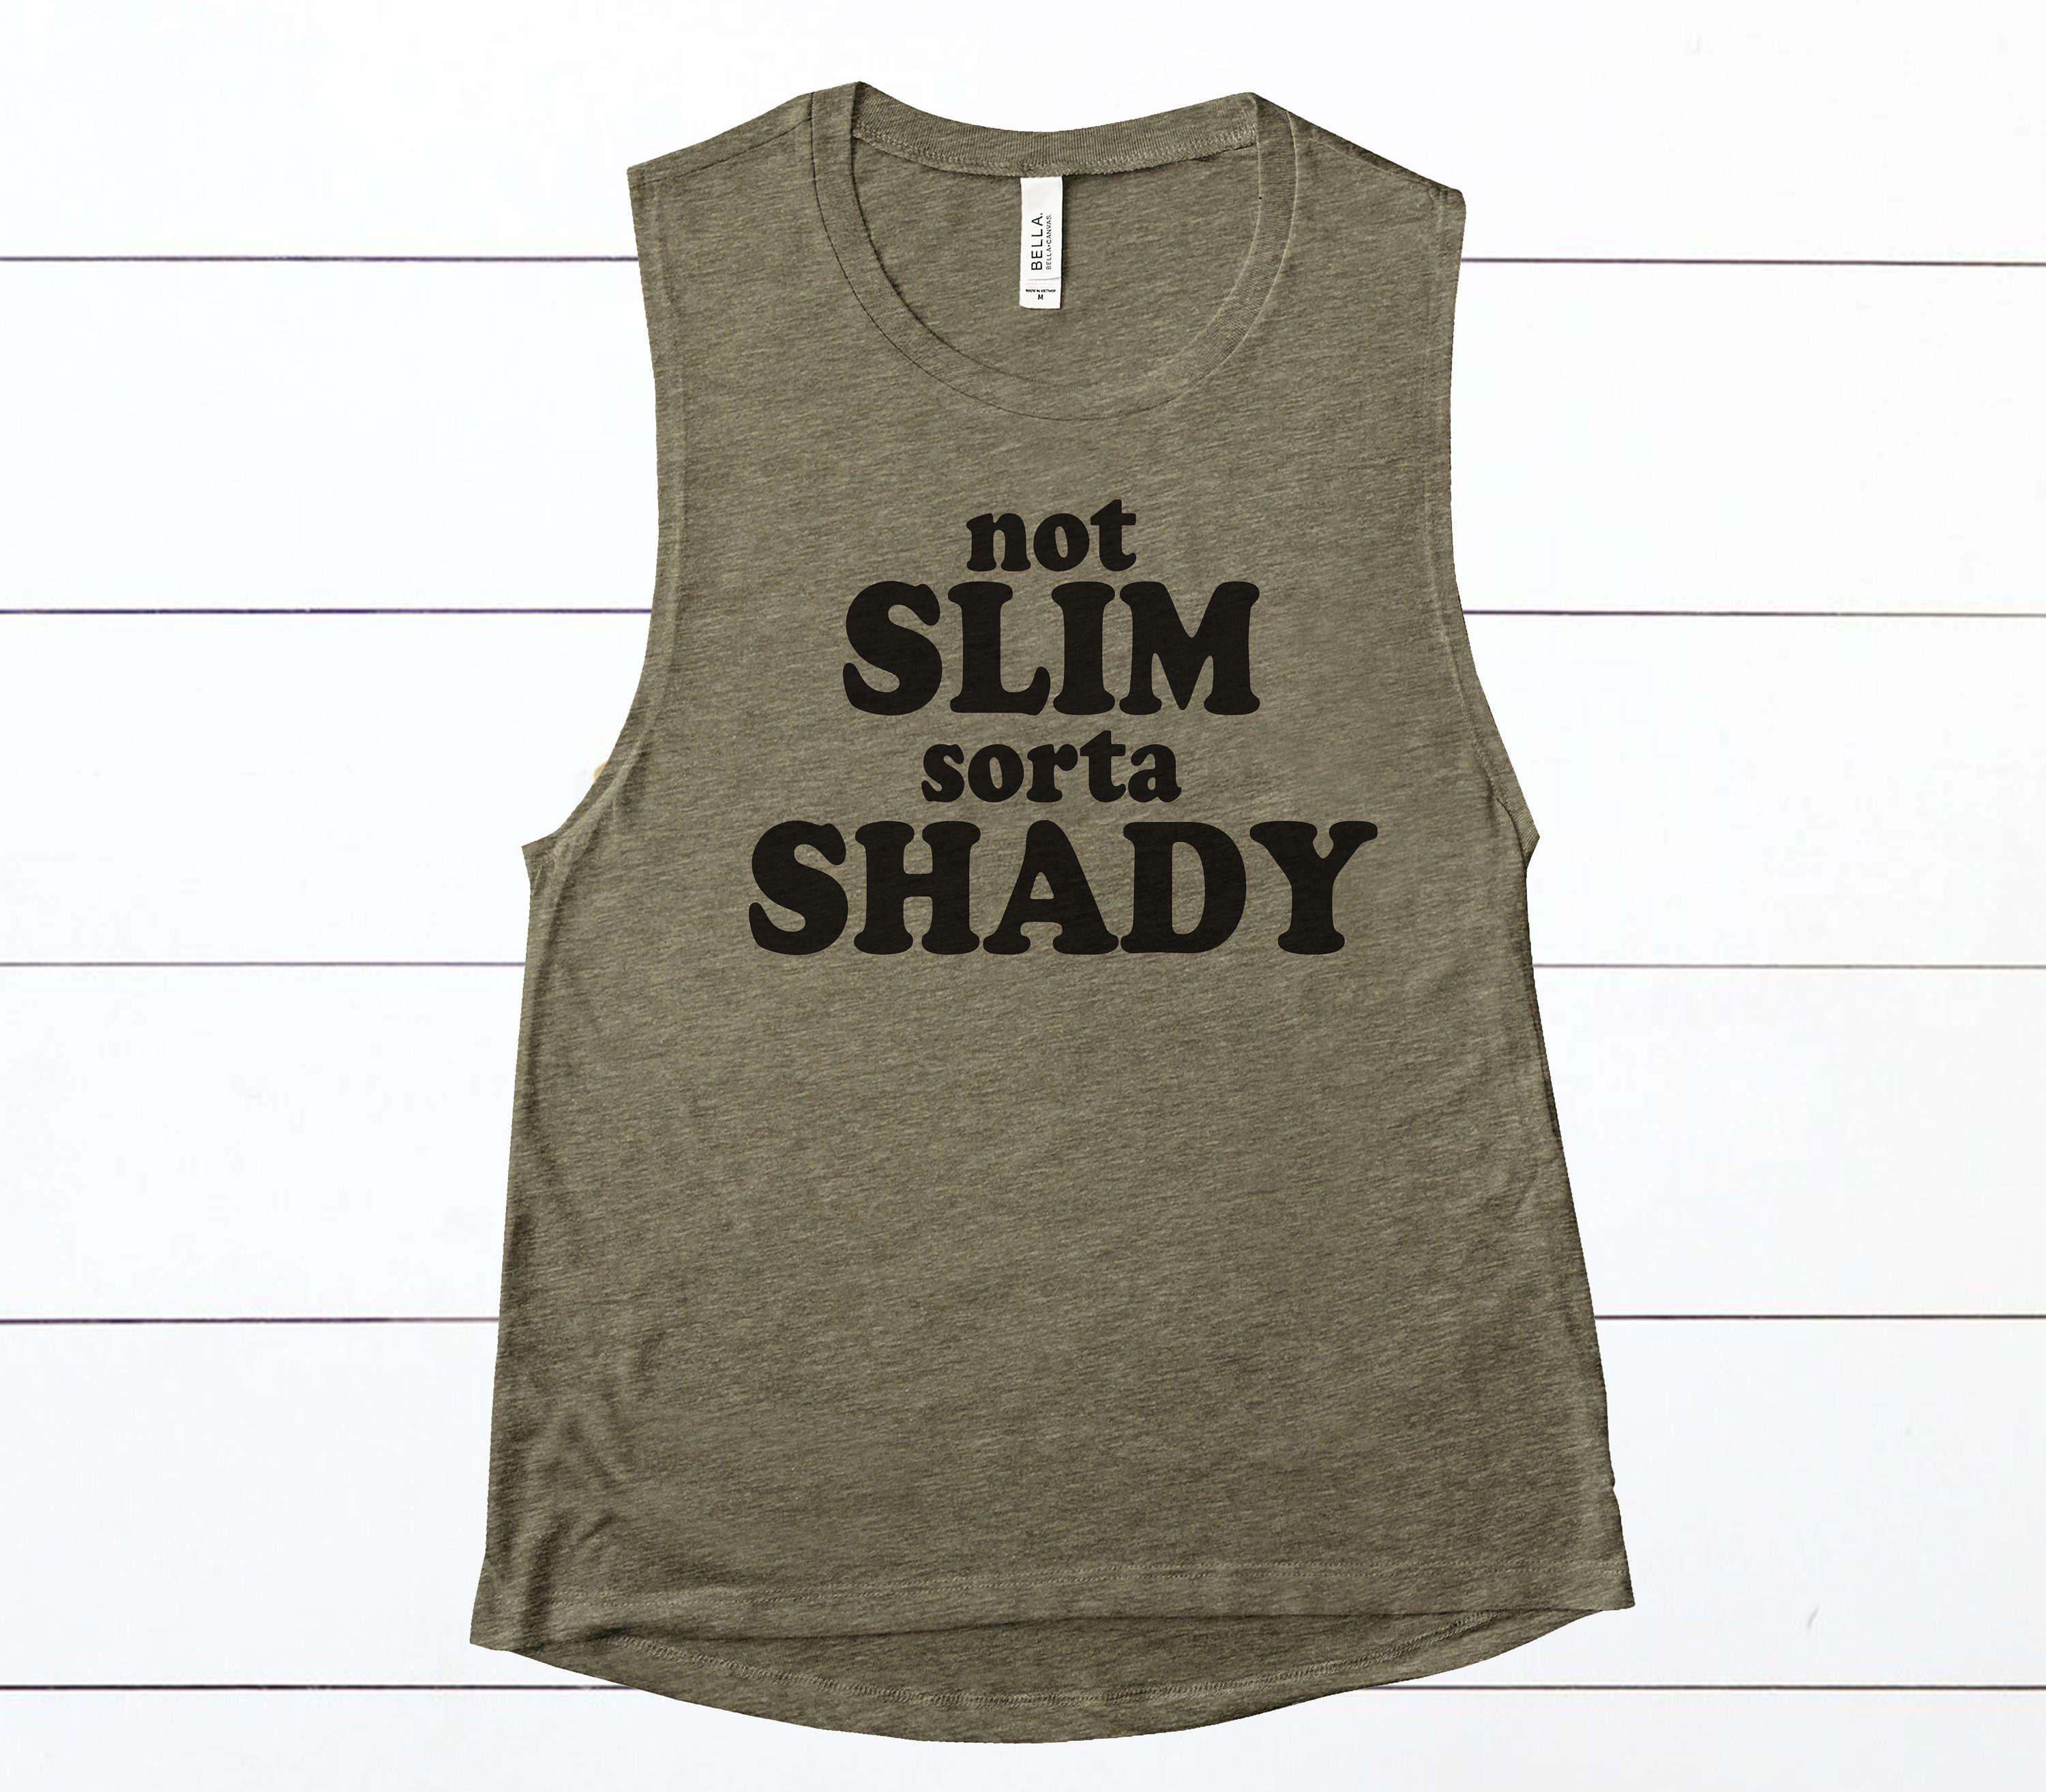 Not Slim Sorta Shady Funny Trending Womens Tank Top Gift For Mom Best Friend